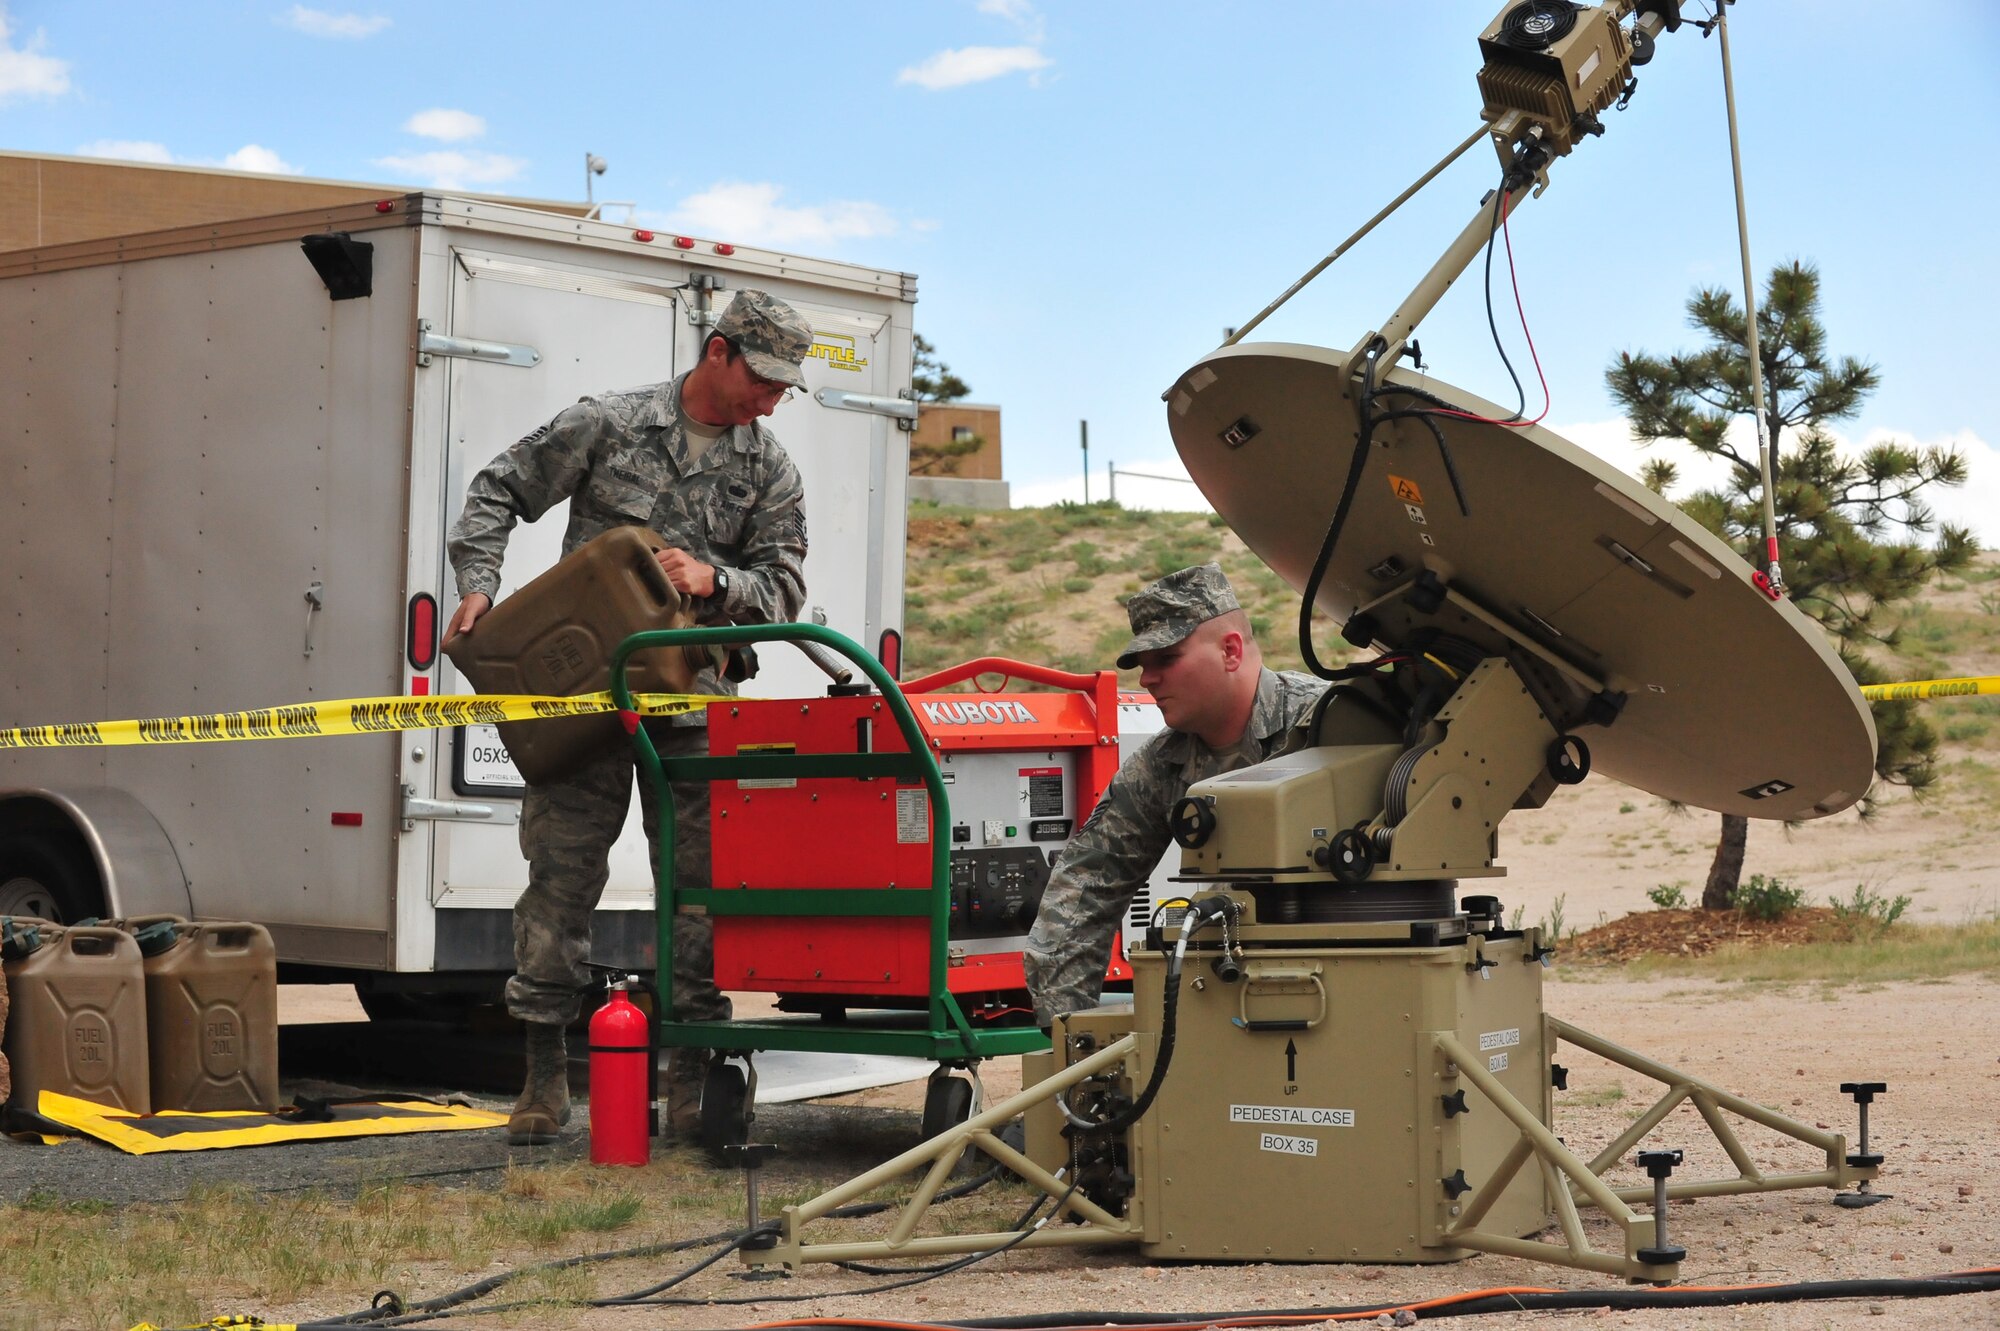 Two Airmen operate communications equipment